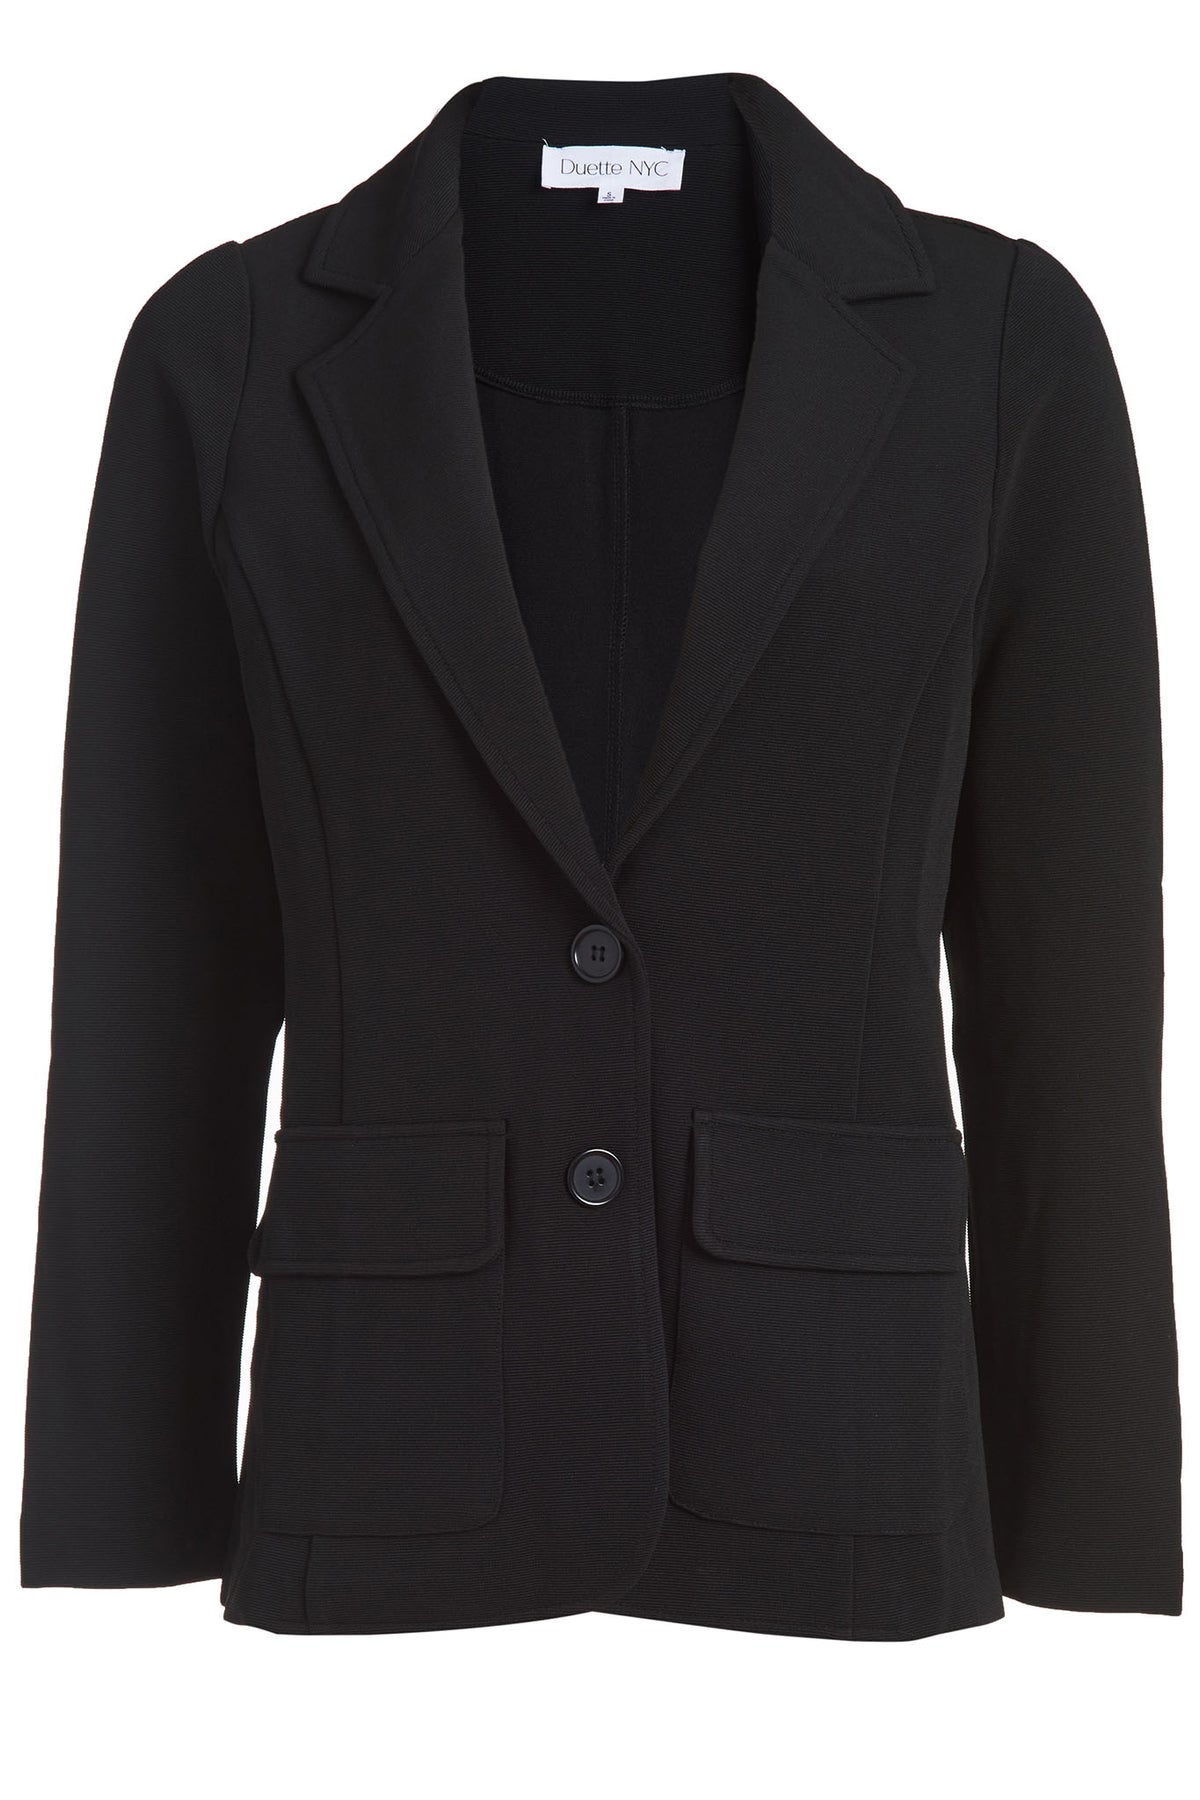 The Boardroom Luxury Textured Knit Blazer - The Greenwich – DuetteNYC